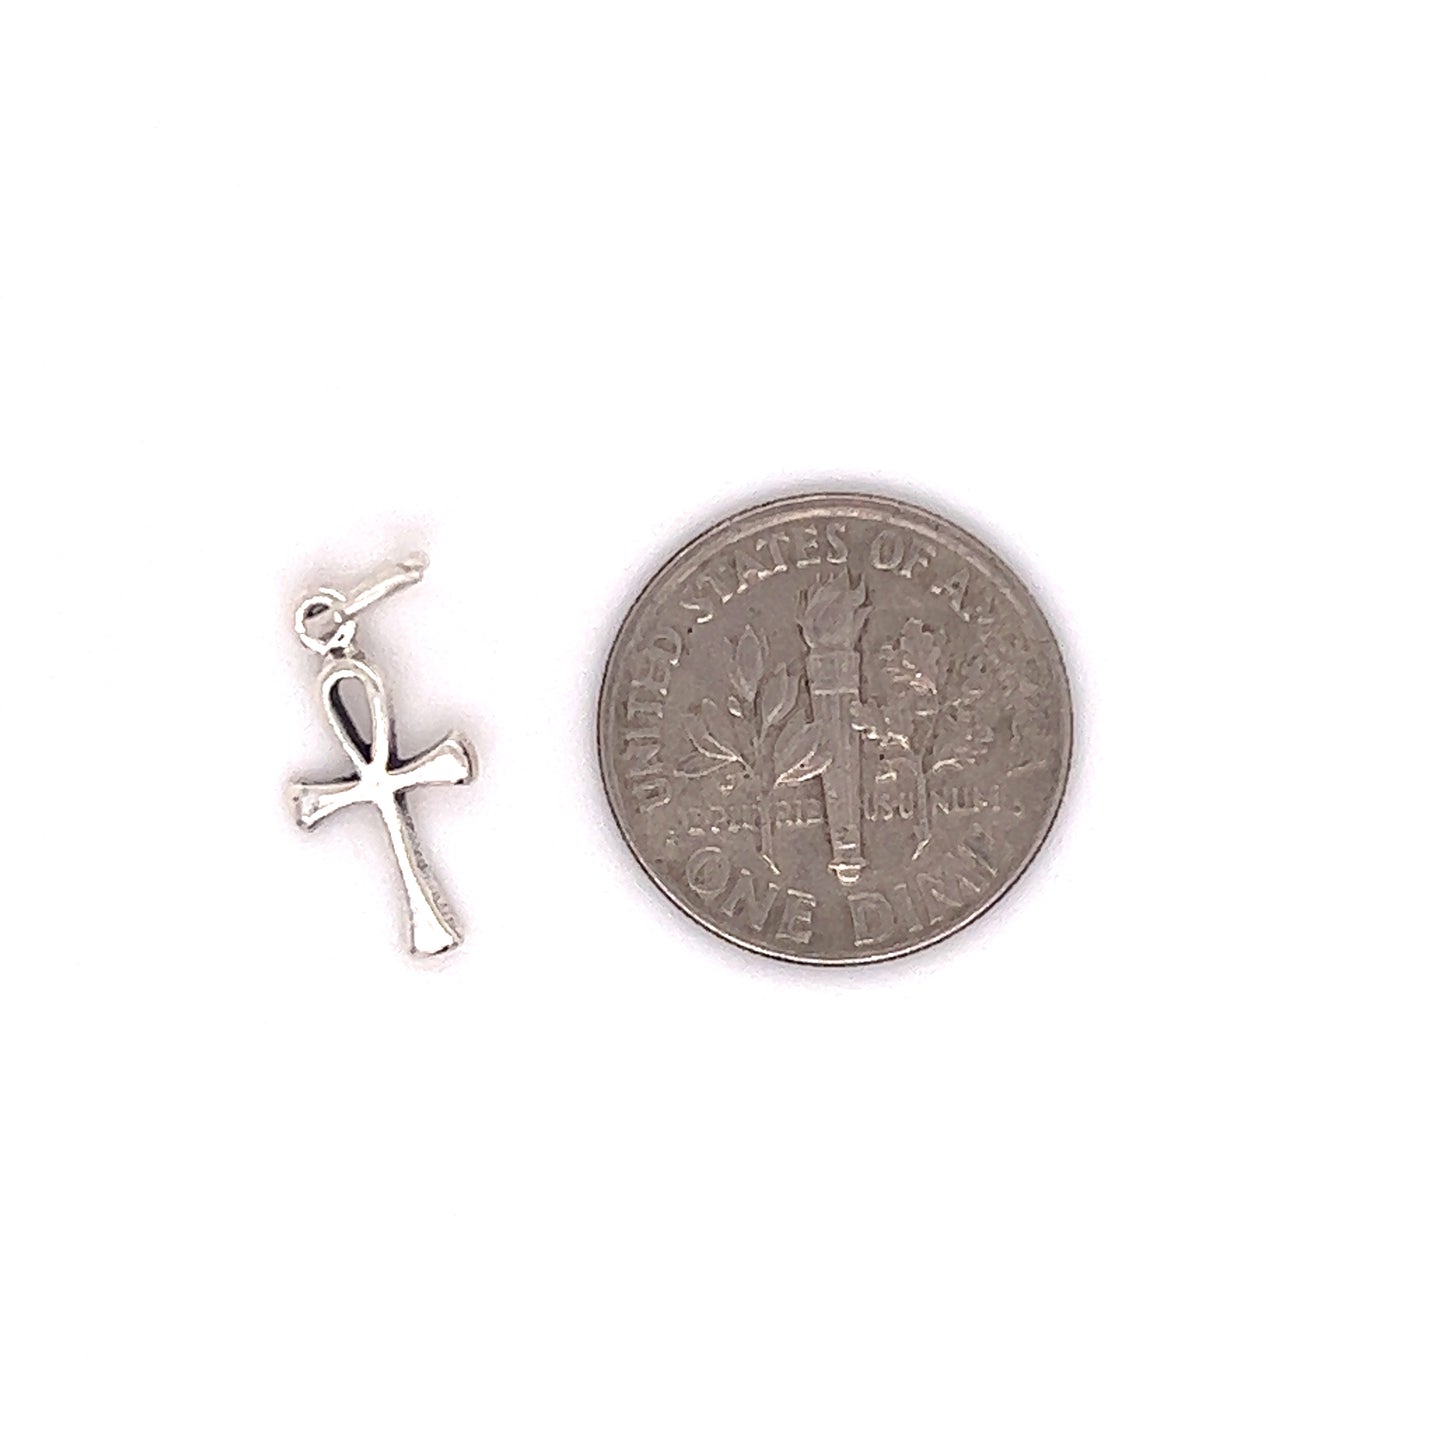 An Egyptian symbol of eternal life, the Enchanting Tiny Ankh Charm by Super Silver, is placed next to a silver coin.